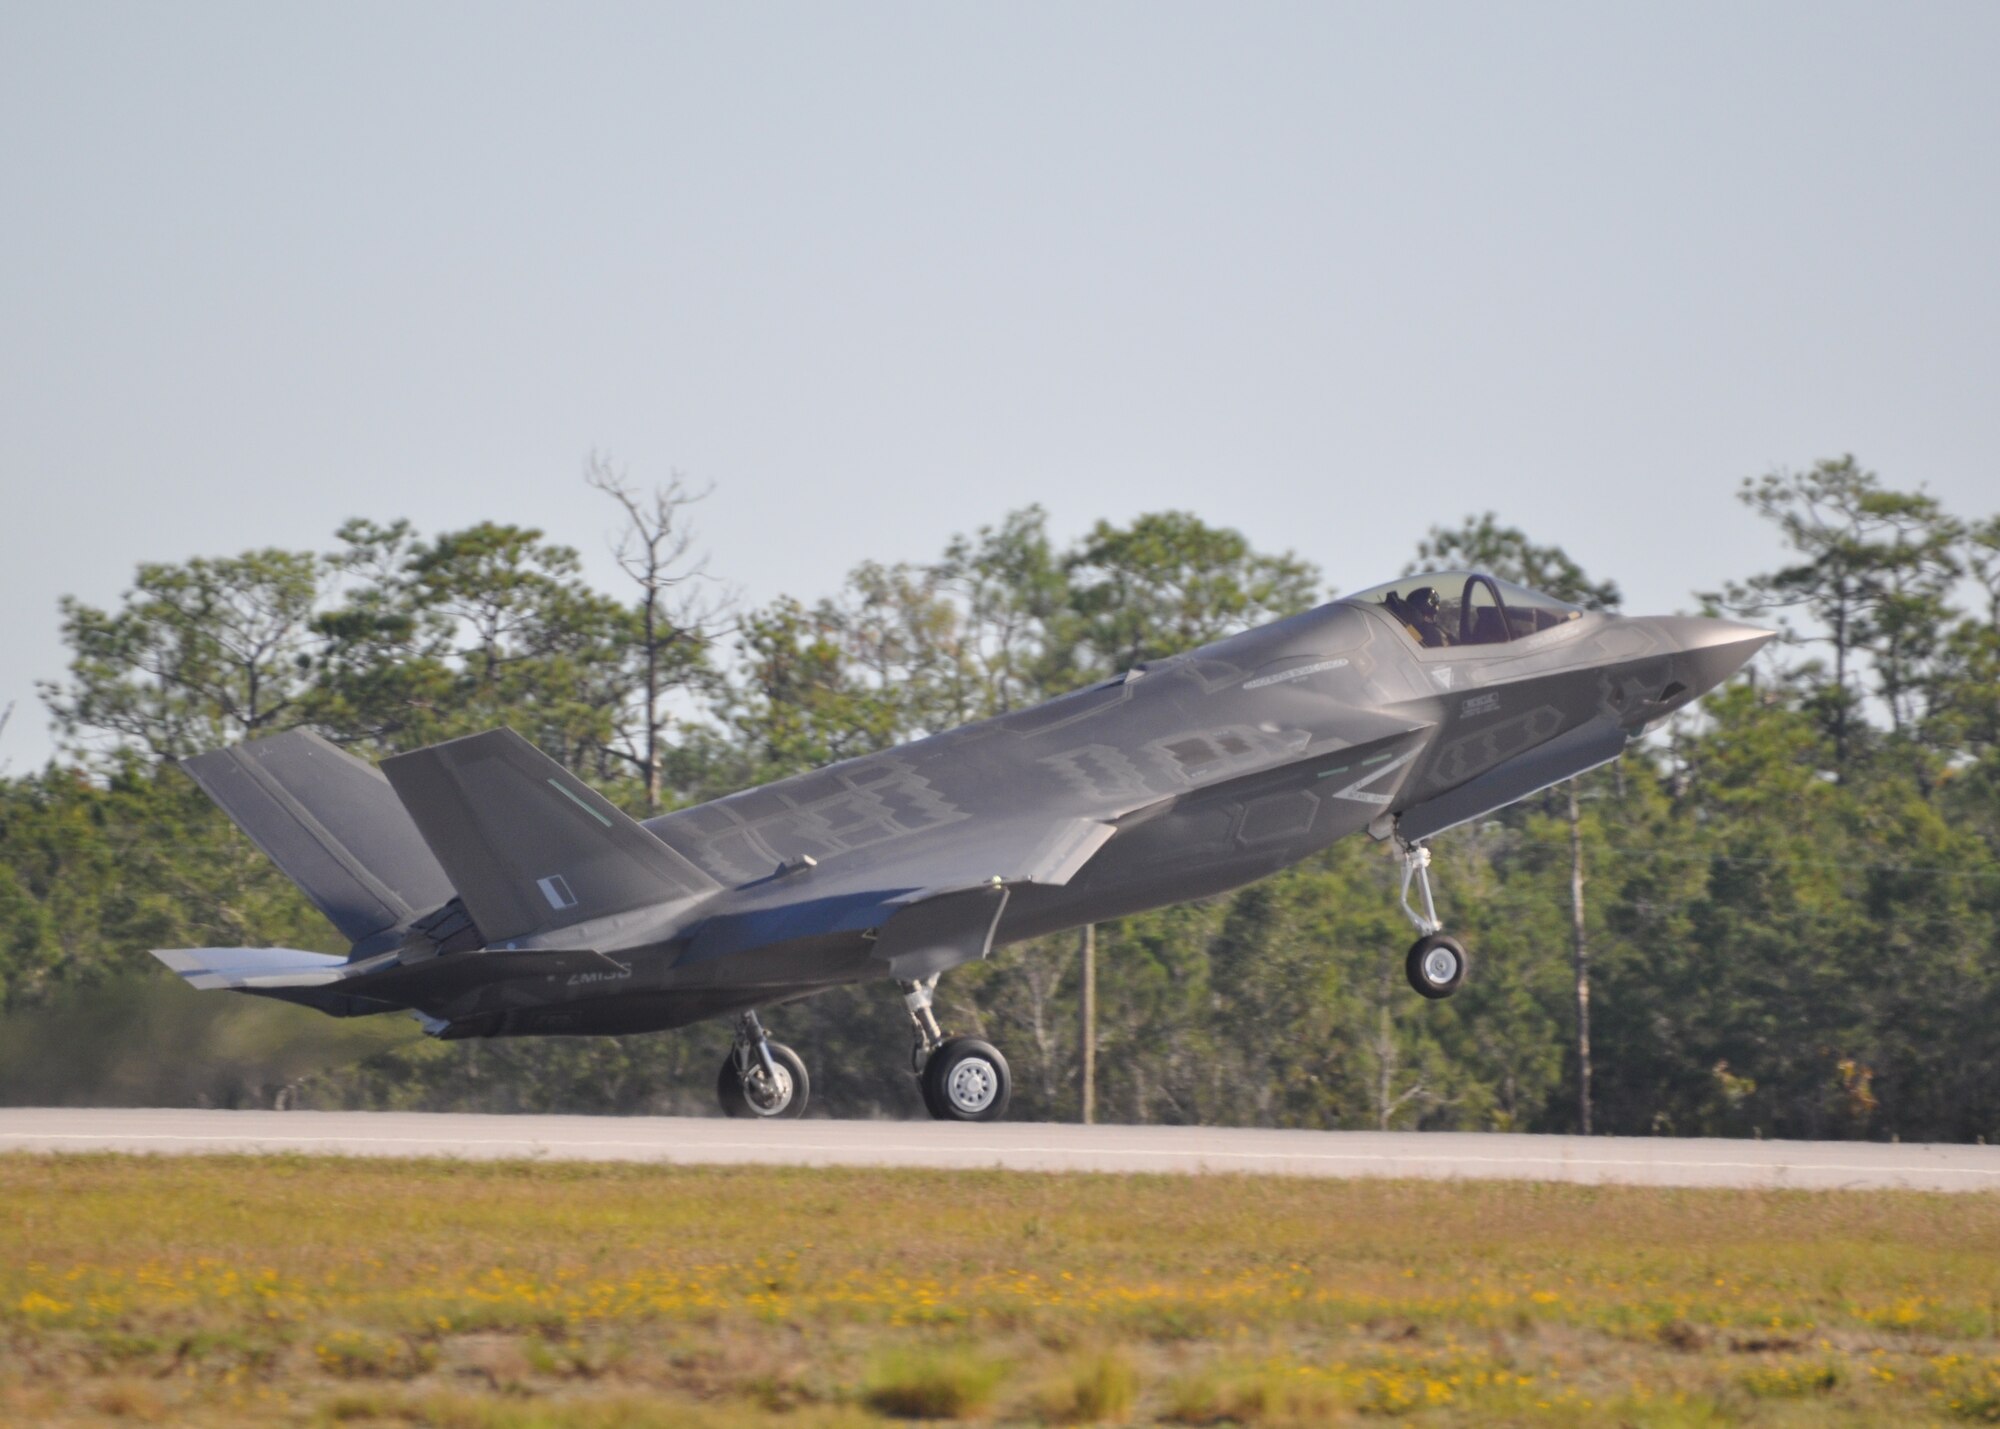 A second British F-35B Lightning II arrives at Eglin Air Force Base, Fla., from Naval Air Station Fort Worth Joint Reserve Base, Texas, increasing the capability for pilot and maintenance training. The first class of United Kingdom Royal Air Force and Royal Navy aircraft maintainers attending courses at the F-35 Academic Training Center met the jet flown by U.K. Royal Air Force Sqn. Ldr. Jim Schofield. The U.K. aircraft are imbedded in the Marine Fighter Attack Training Squadron 501, and are used by both countries to conduct F-35 training. Accompanied by a U.S. F-35B, there are now 13 B variants of the joint strike fighter at the Marine squadron. Combined with the nine A variants flown by the Air Force, Eglin is the largest fleet of F-35s in the world. Later this month, an RAF and RN pilot will begin instructor pilot training, making them the first international pilots trained at Eglin on the fifth-generation, multi-role fighter.[U.S. Air Force photo/Maj. Karen Roganov]